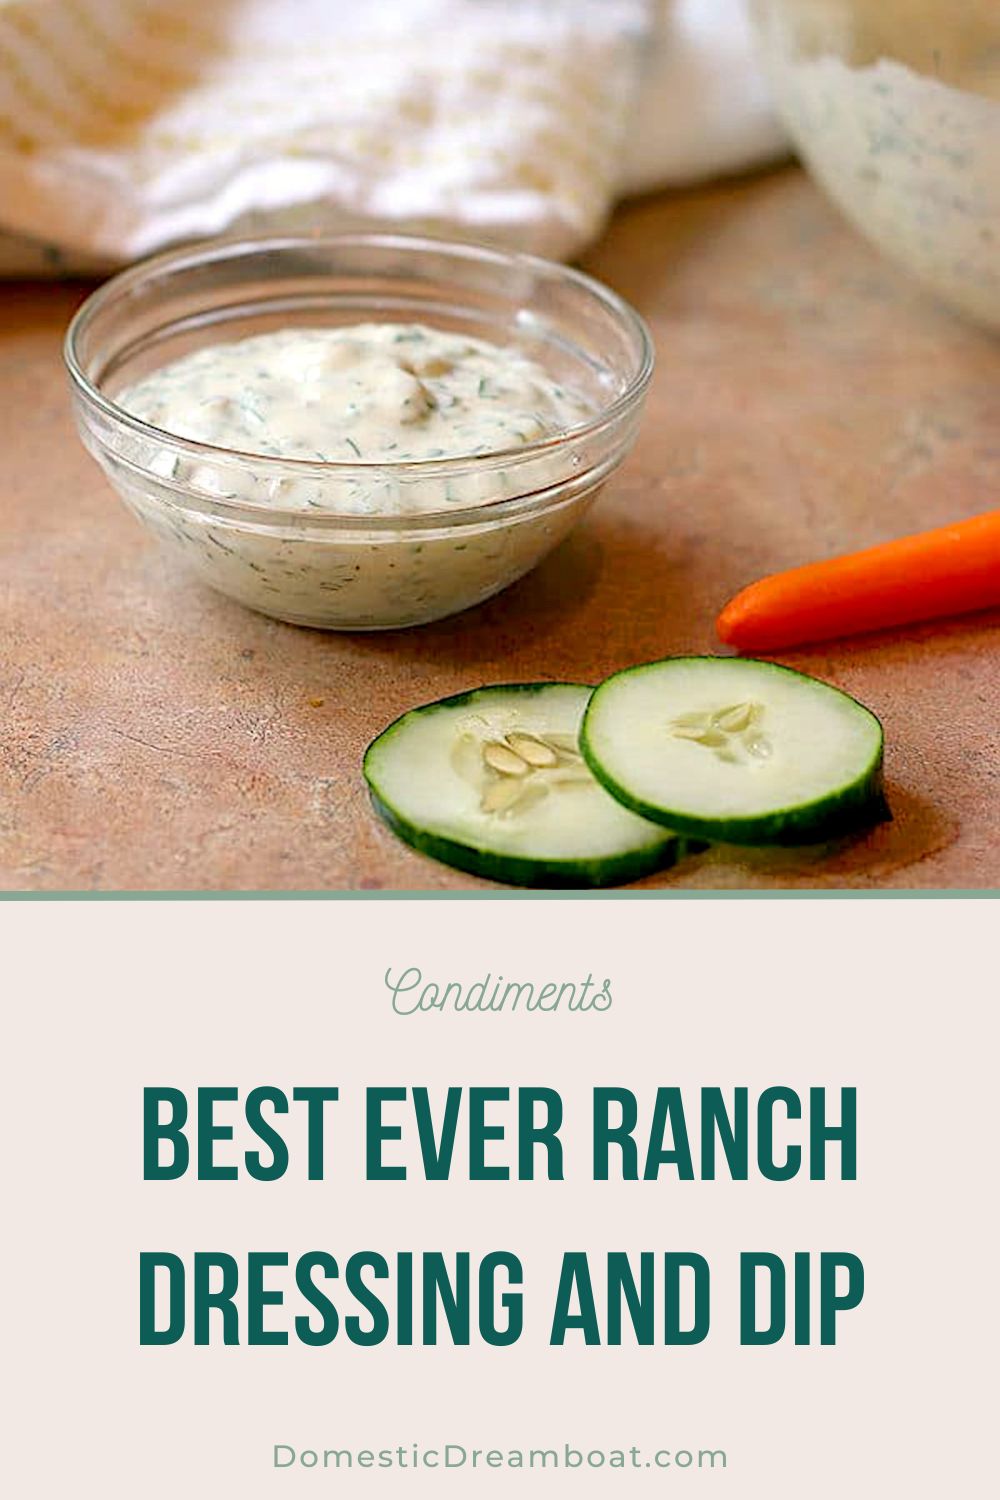 Best Ever Ranch Dressing and Dip